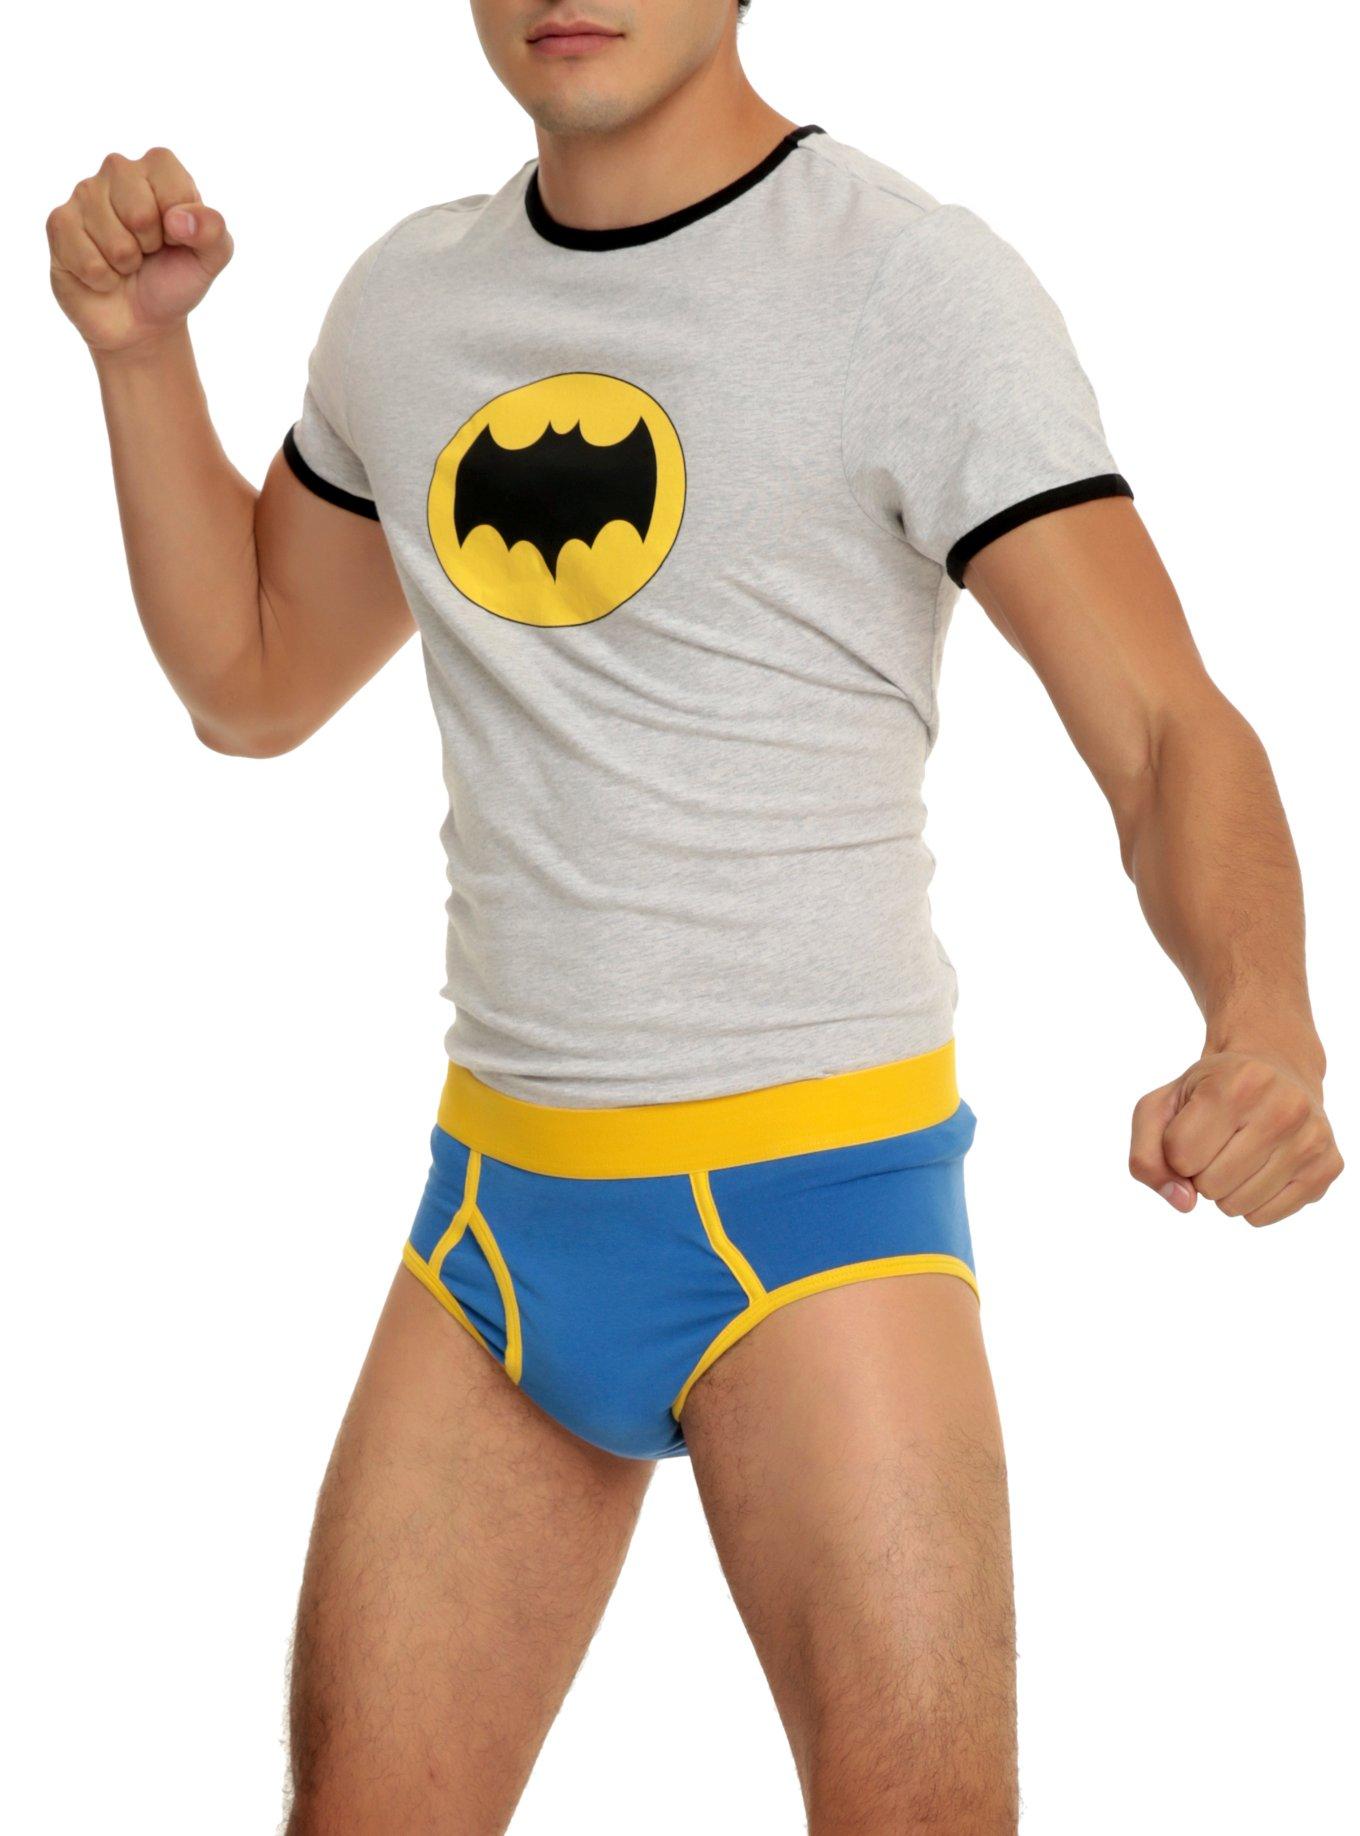 Remember Underoos? Adults can wear them once again thanks to Hot Topic